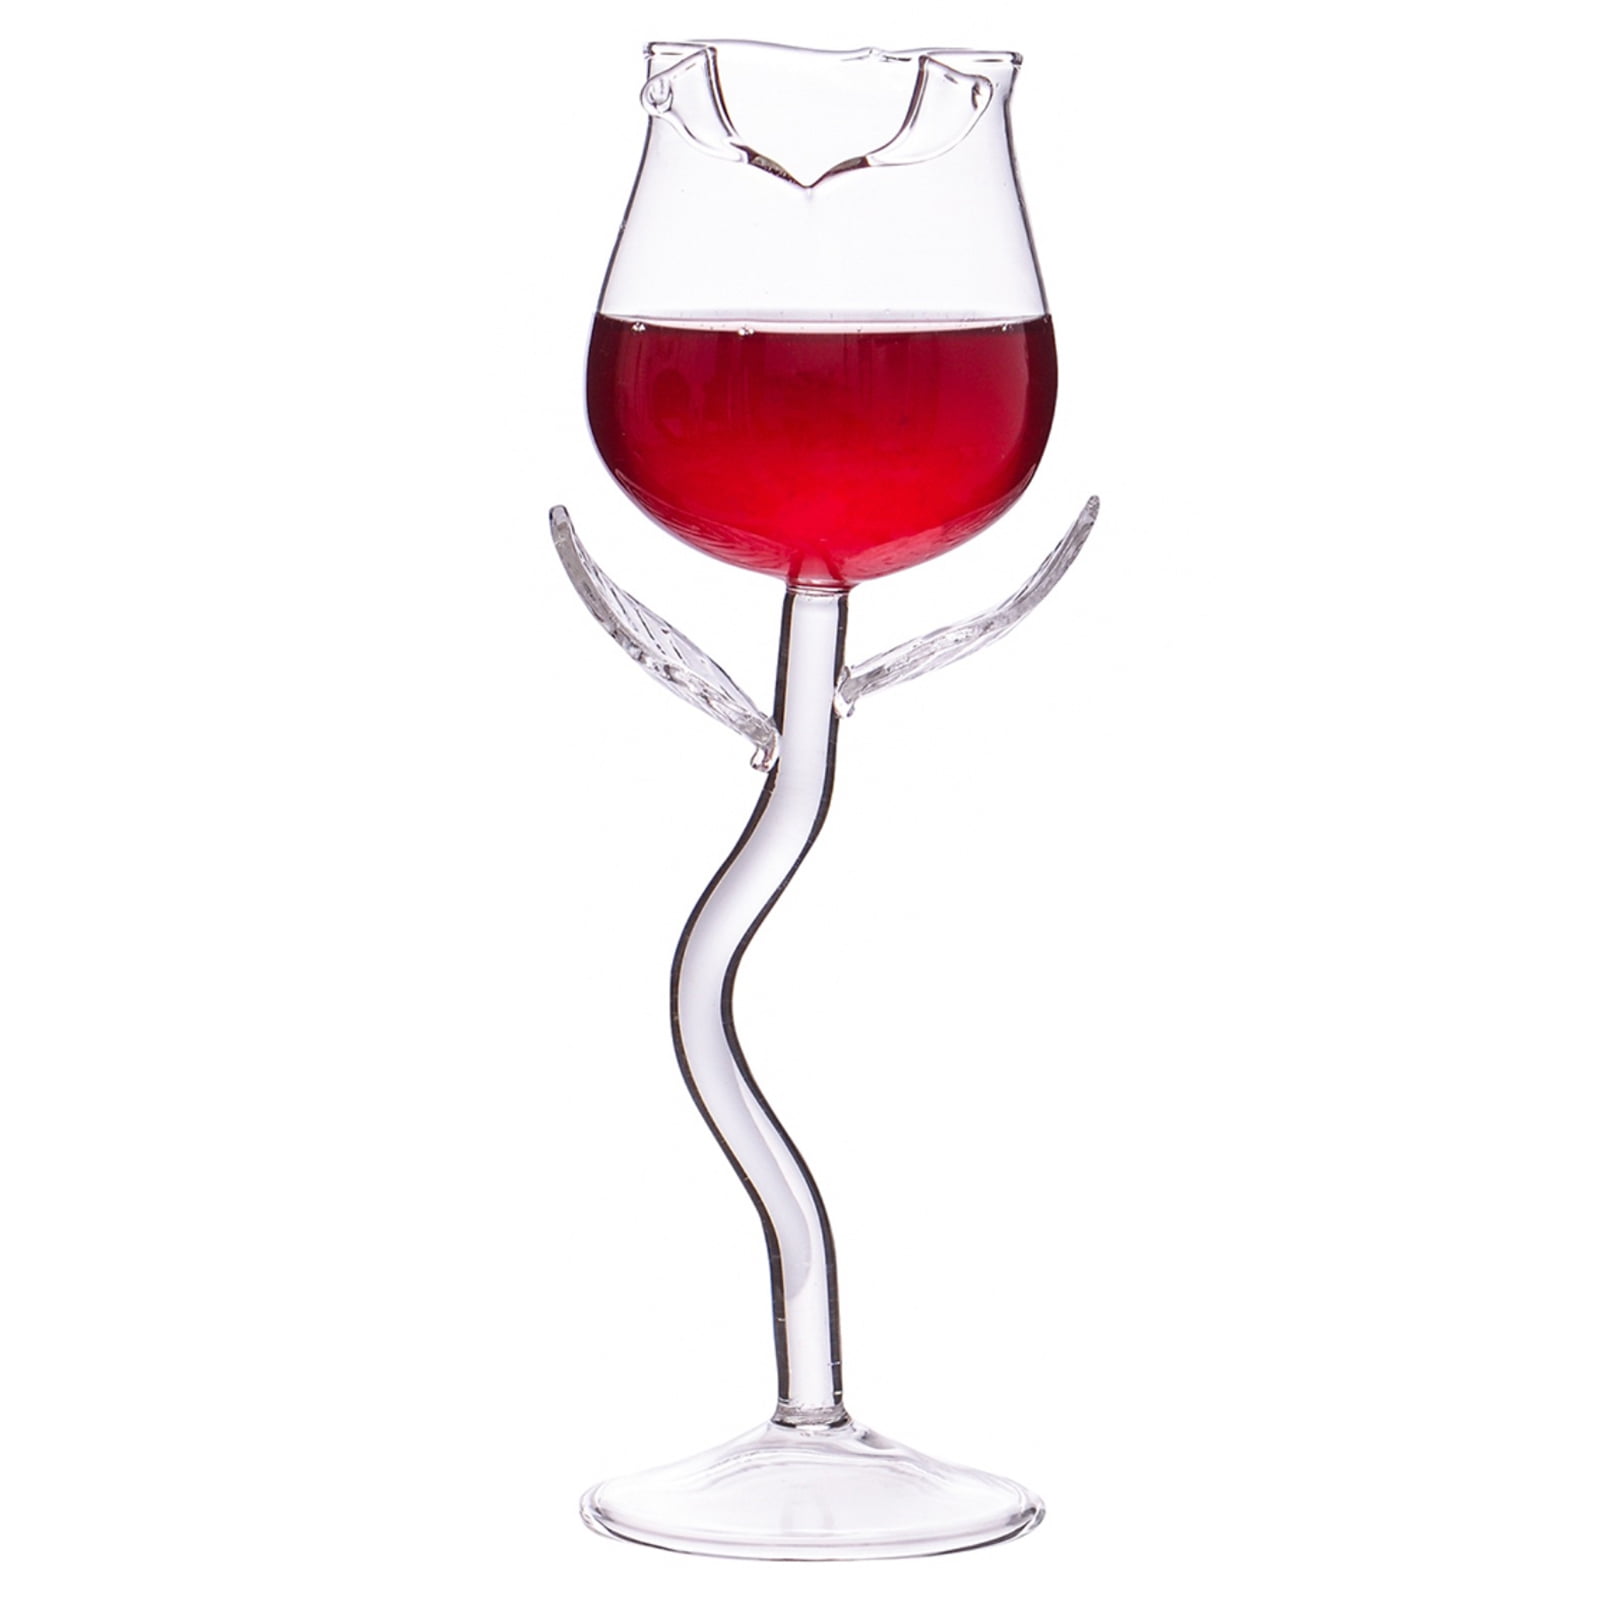 Tohuu Wine Cups Red Wine Glasses Rose-Shaped Wine Glasses Cocktail Cups  Modern Wine Glass with Stem 150/400ml Rose Shape Unique Red Wine Goblet Cups  Cocktail Glasses 2 Colors Available good 